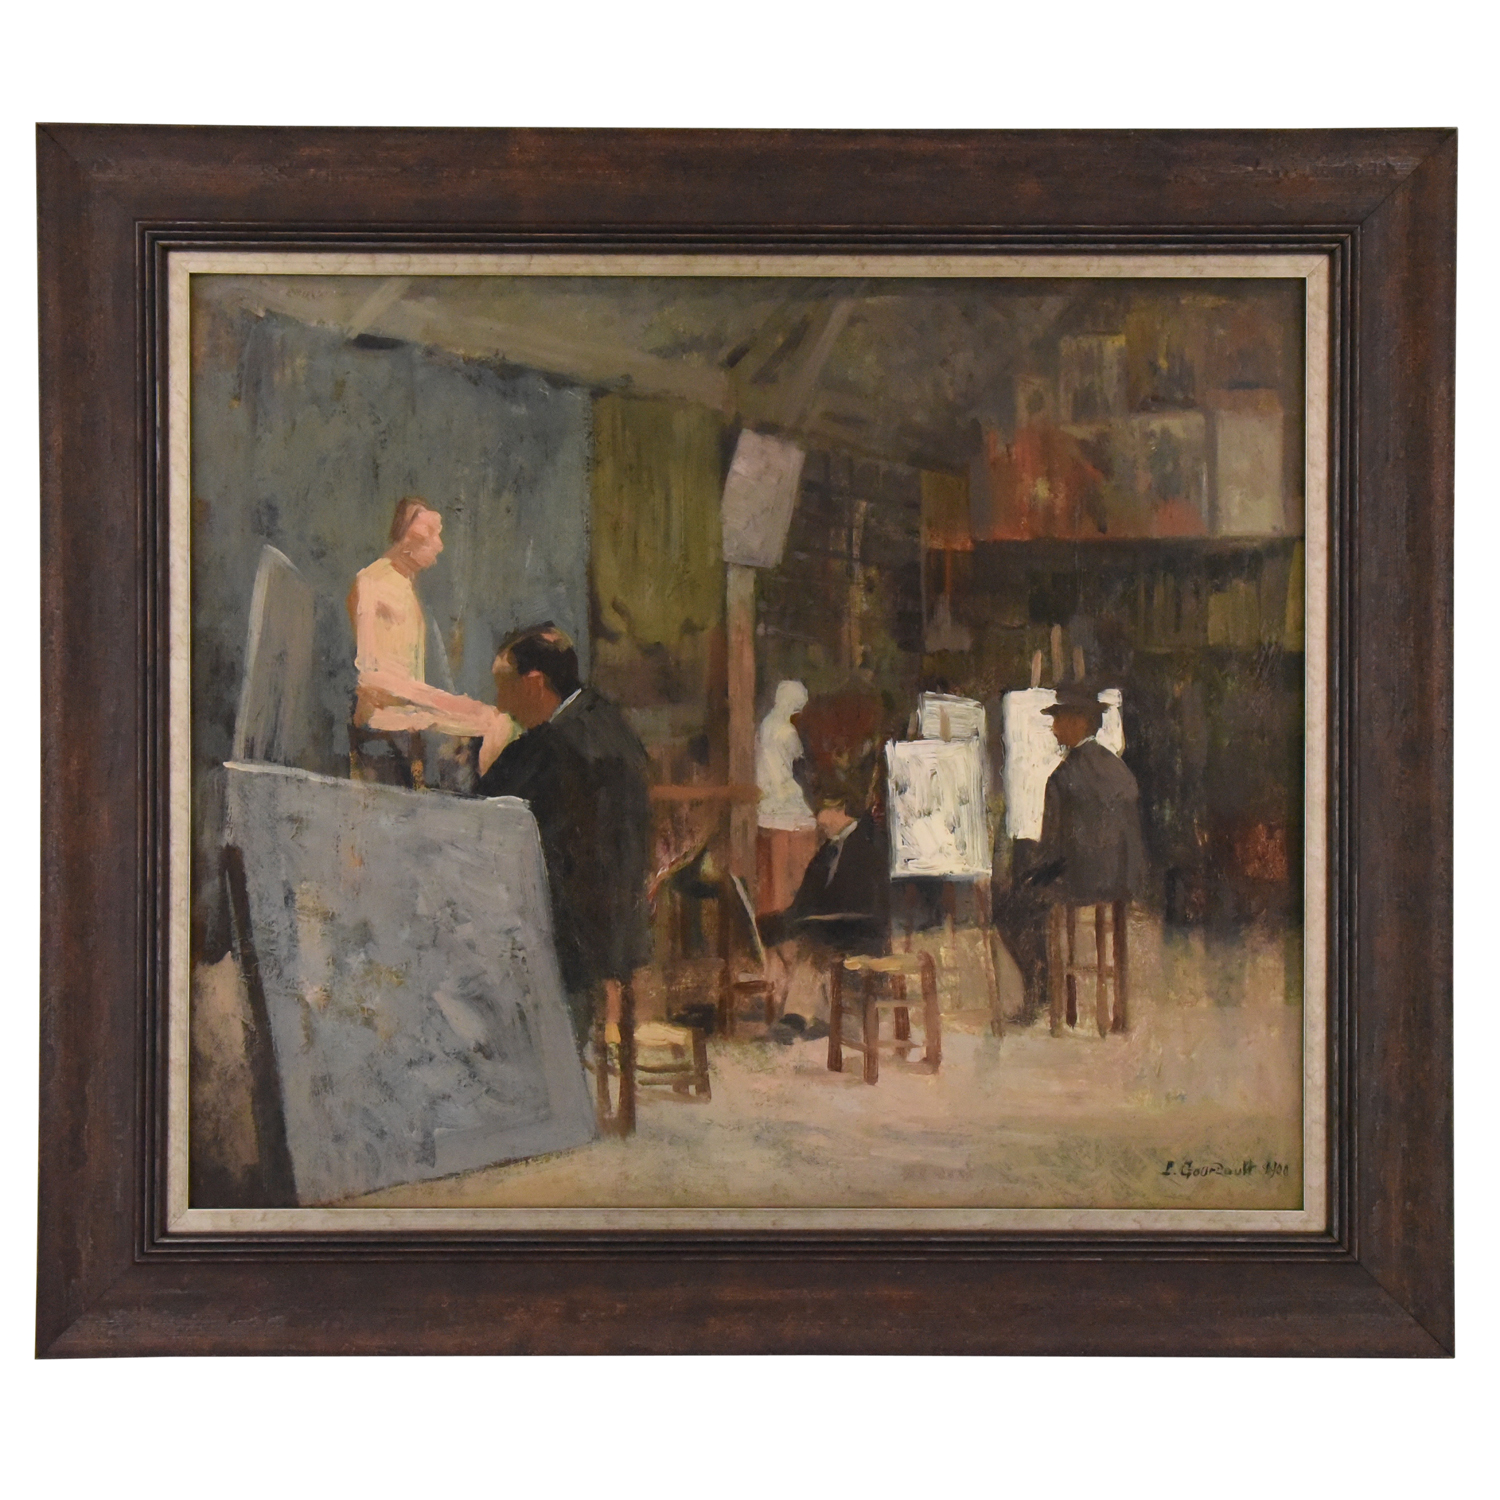 French painting of artists in a painting class or workshop